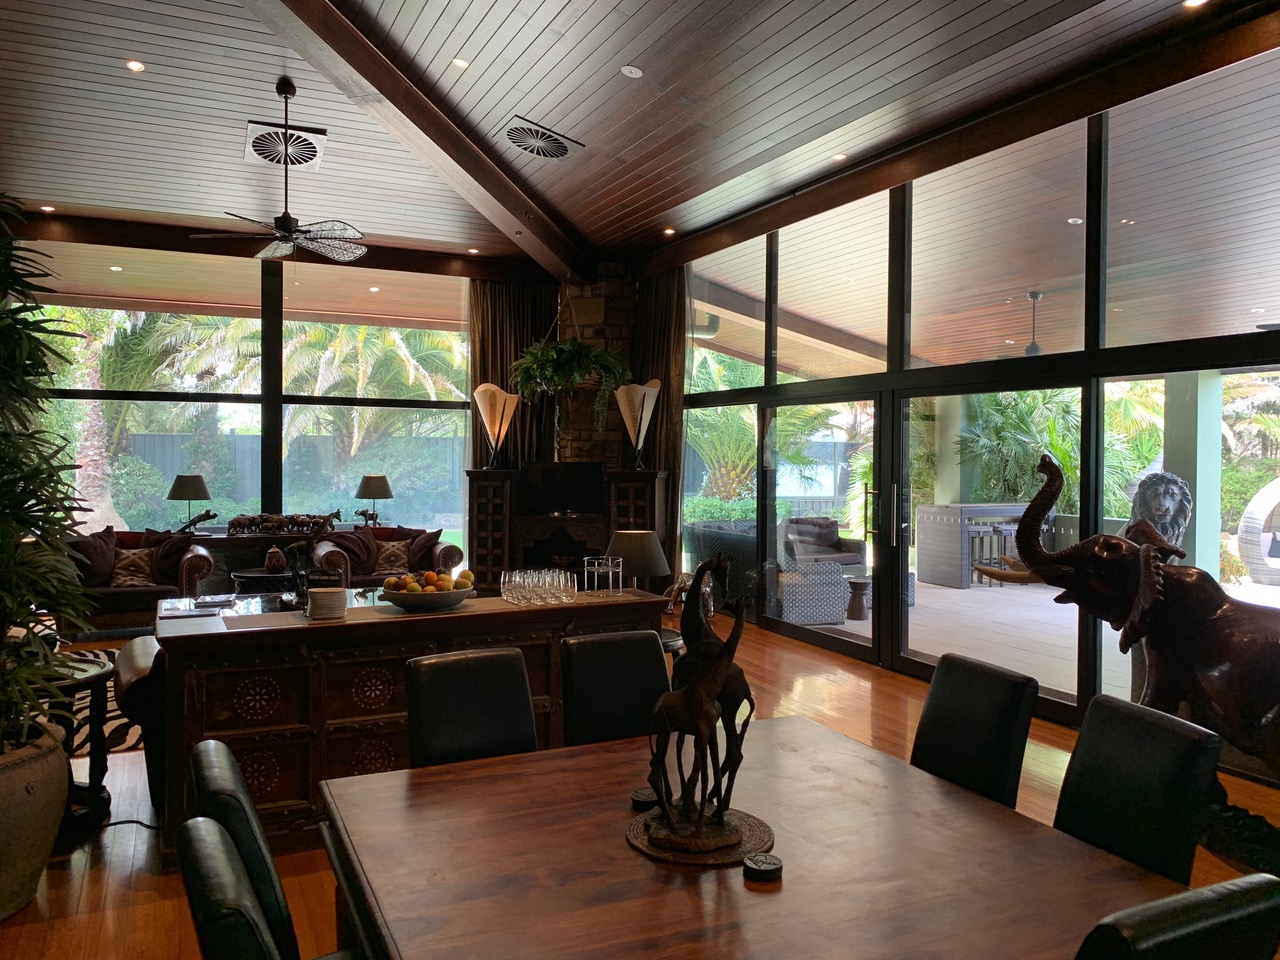 Jamala Lodge dining area, the decor is dark wood and safari inspired including a wooden elephant statue, the floor-to-ceiling windows look and onto a covered decking with outdoor furniture